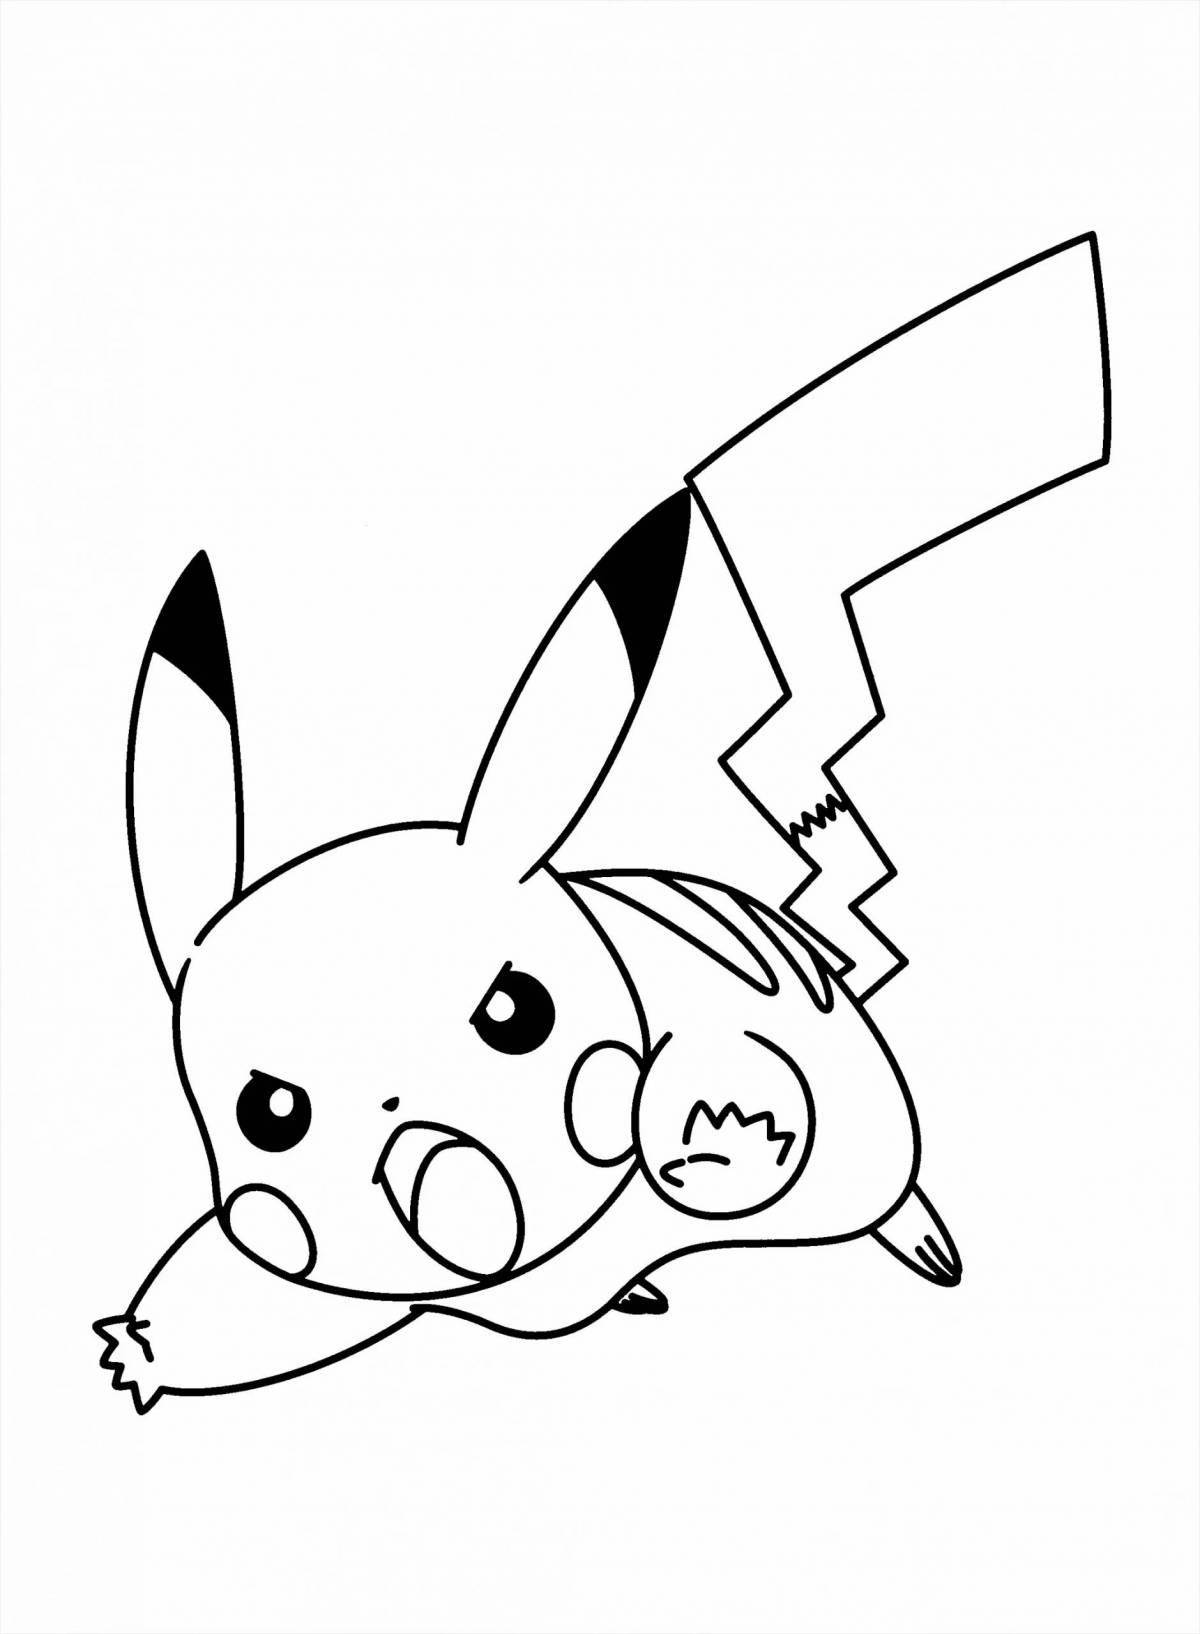 Humorous pikachu and friends